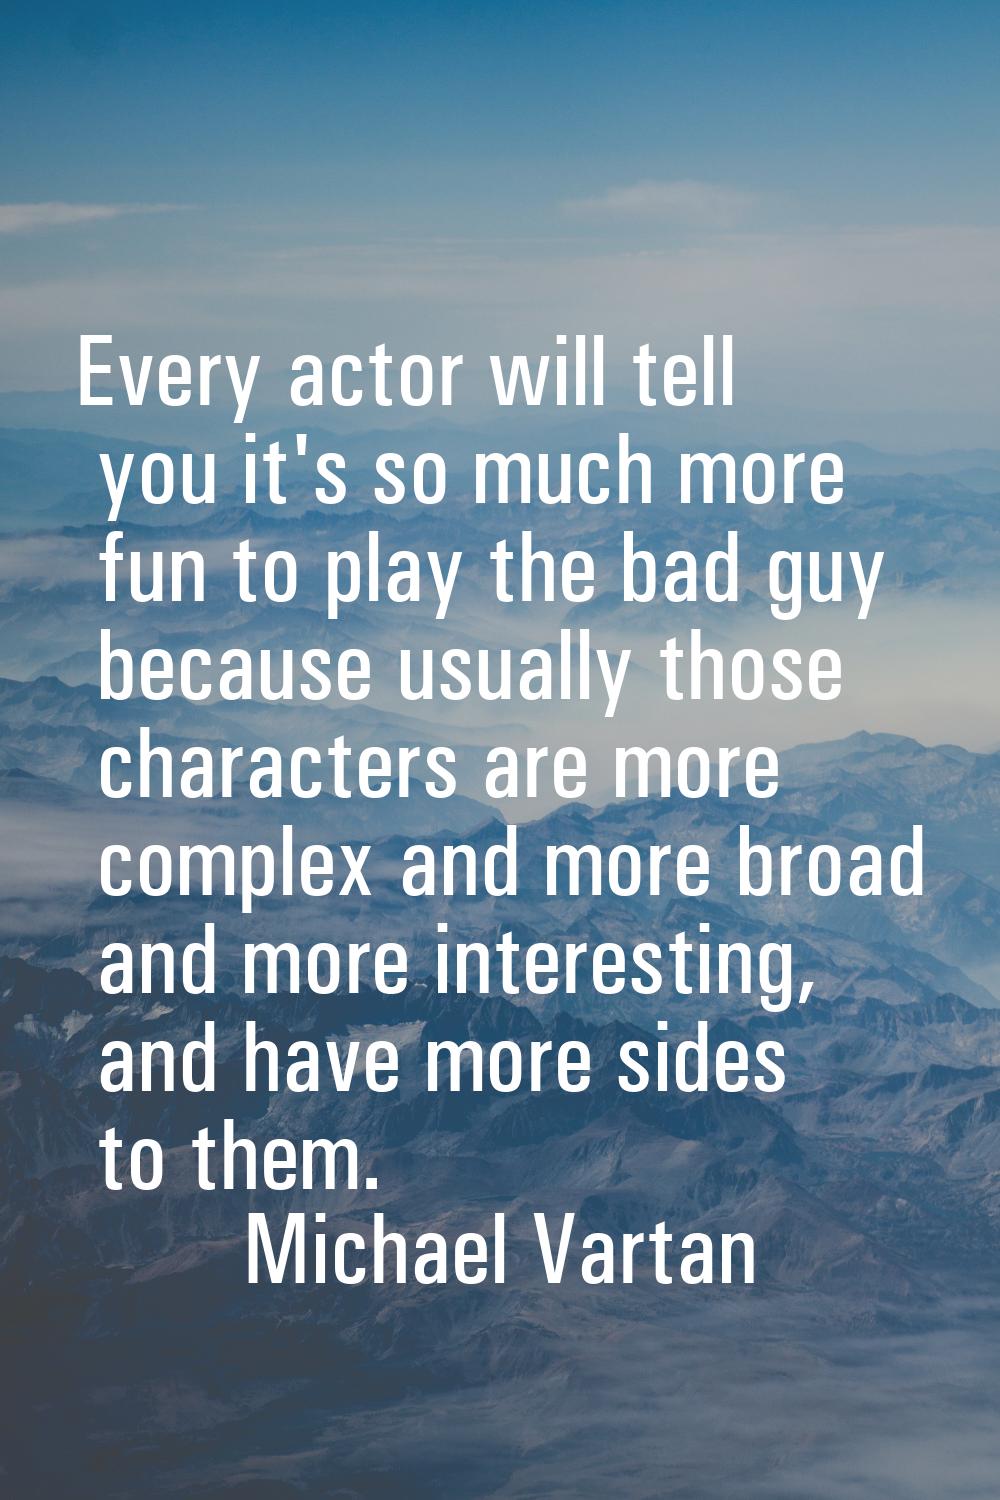 Every actor will tell you it's so much more fun to play the bad guy because usually those character